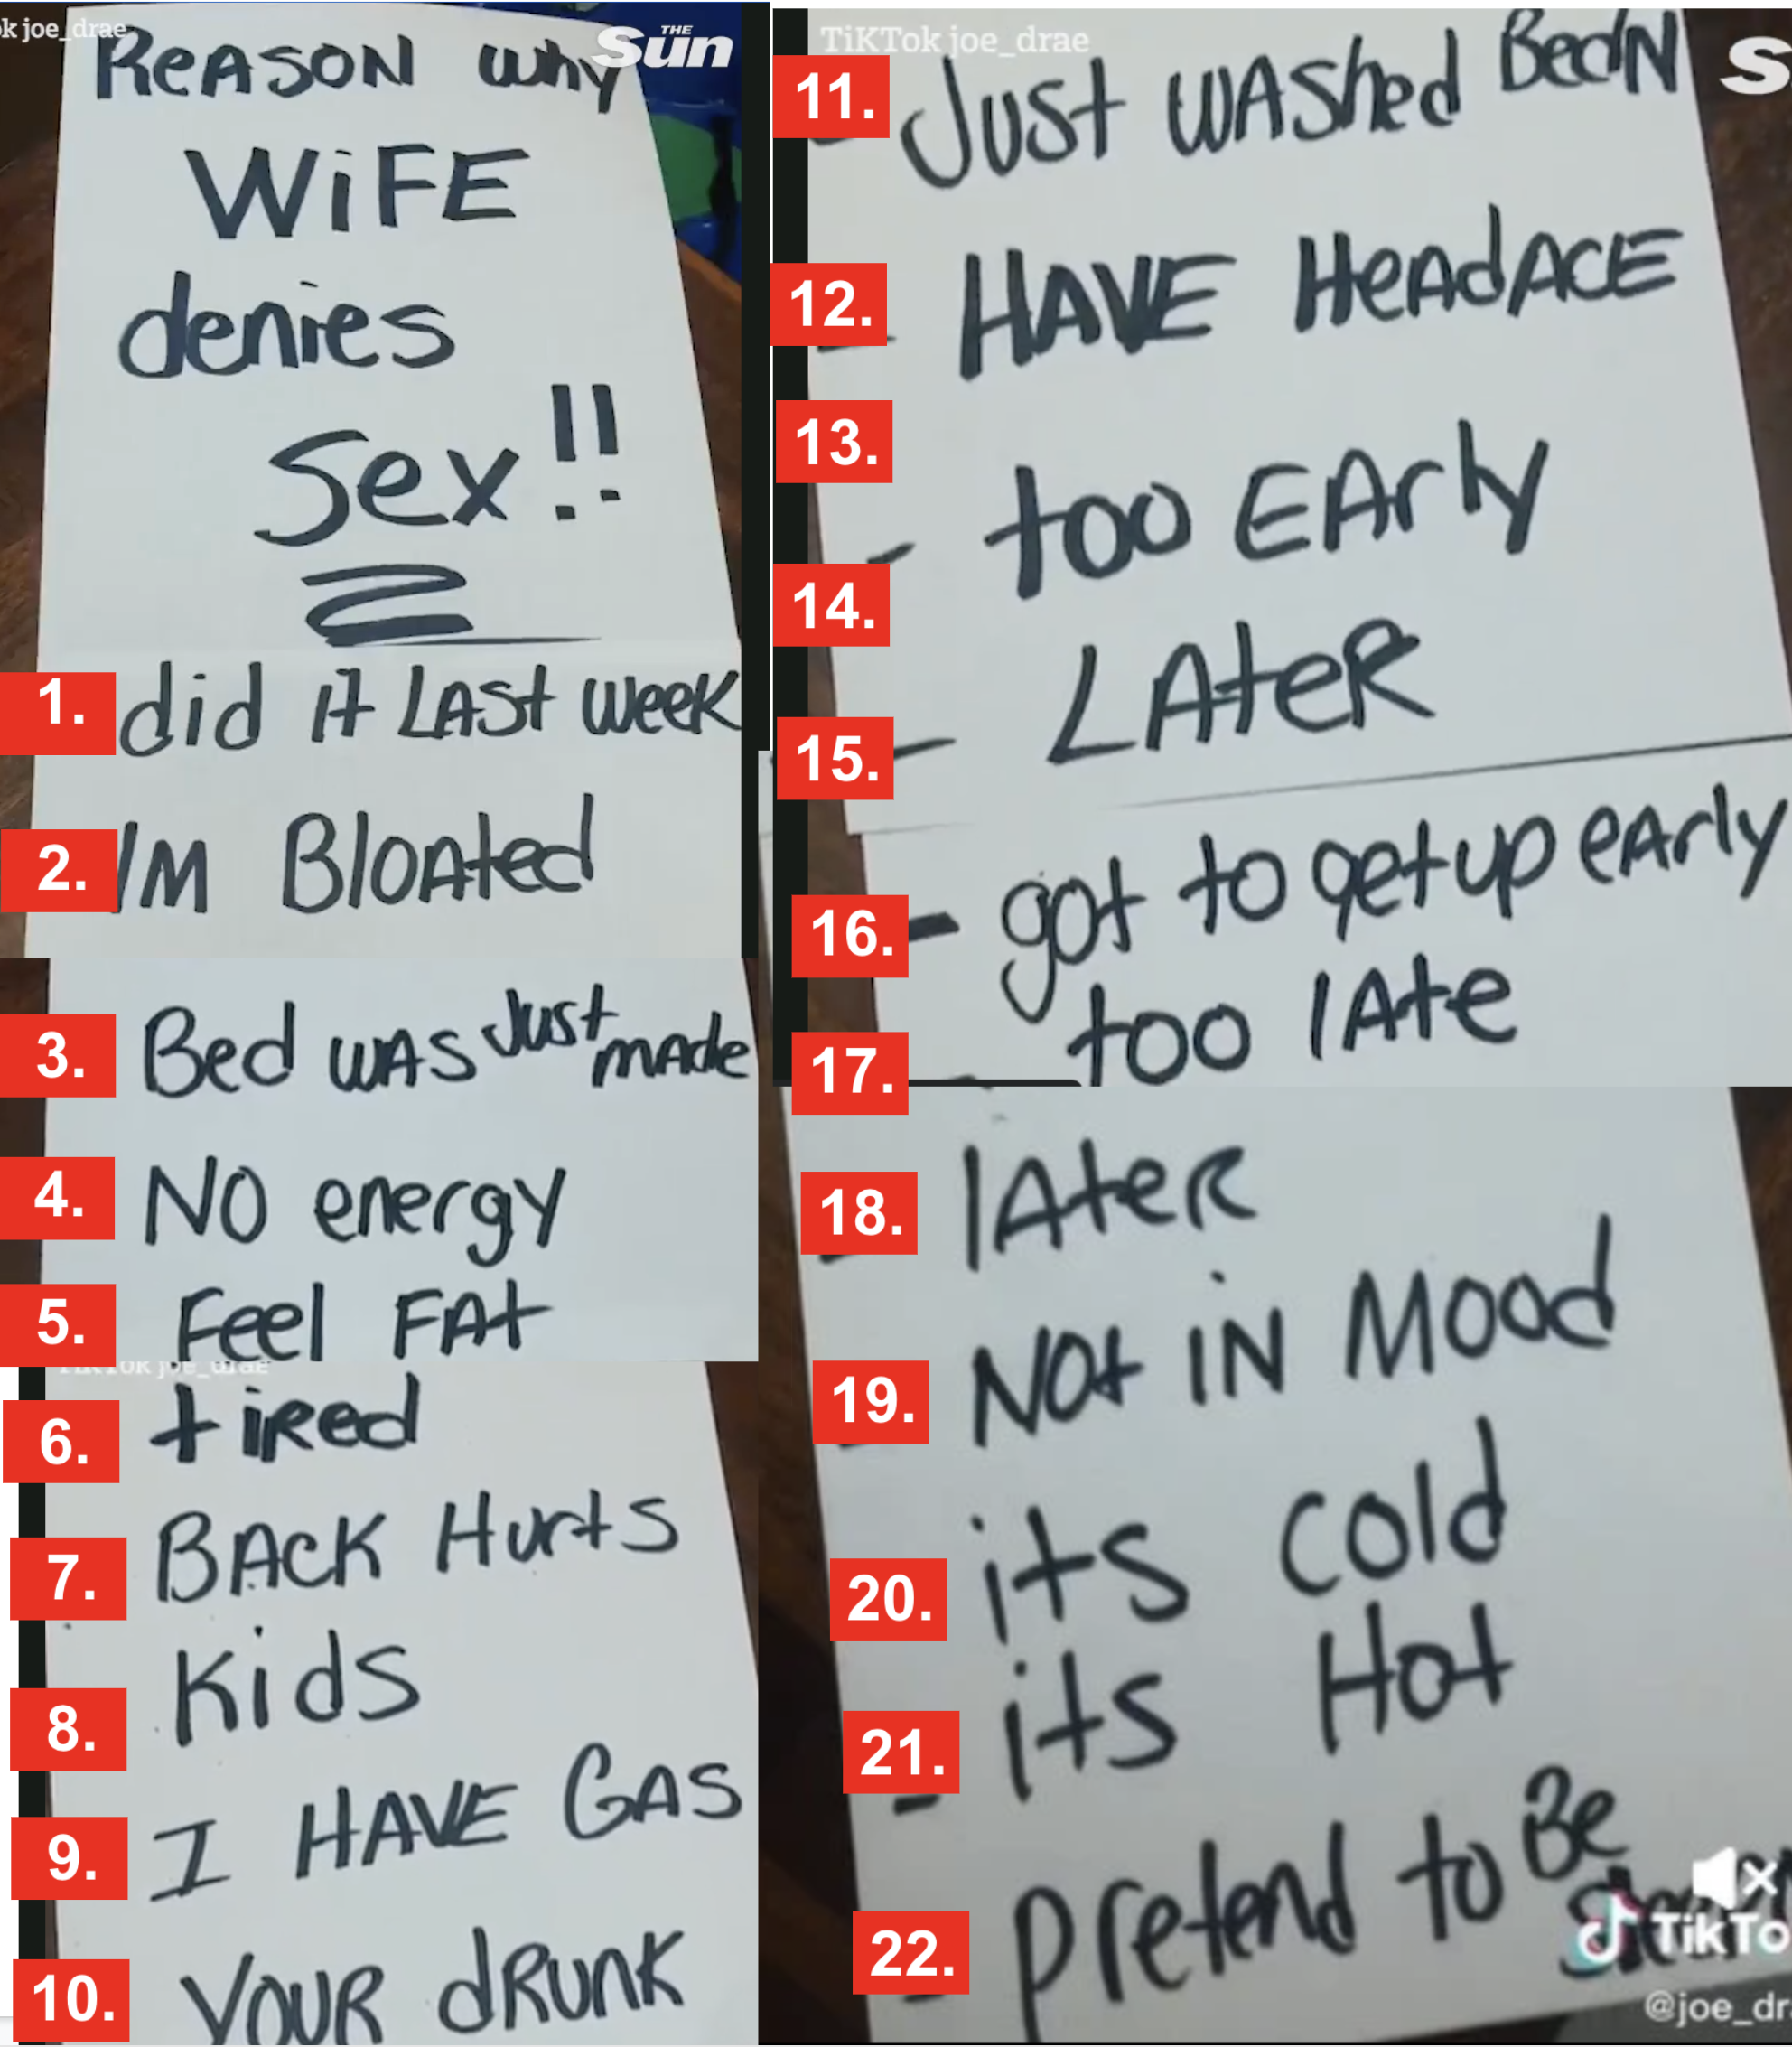 Man's list of wife's reasons for not having sex